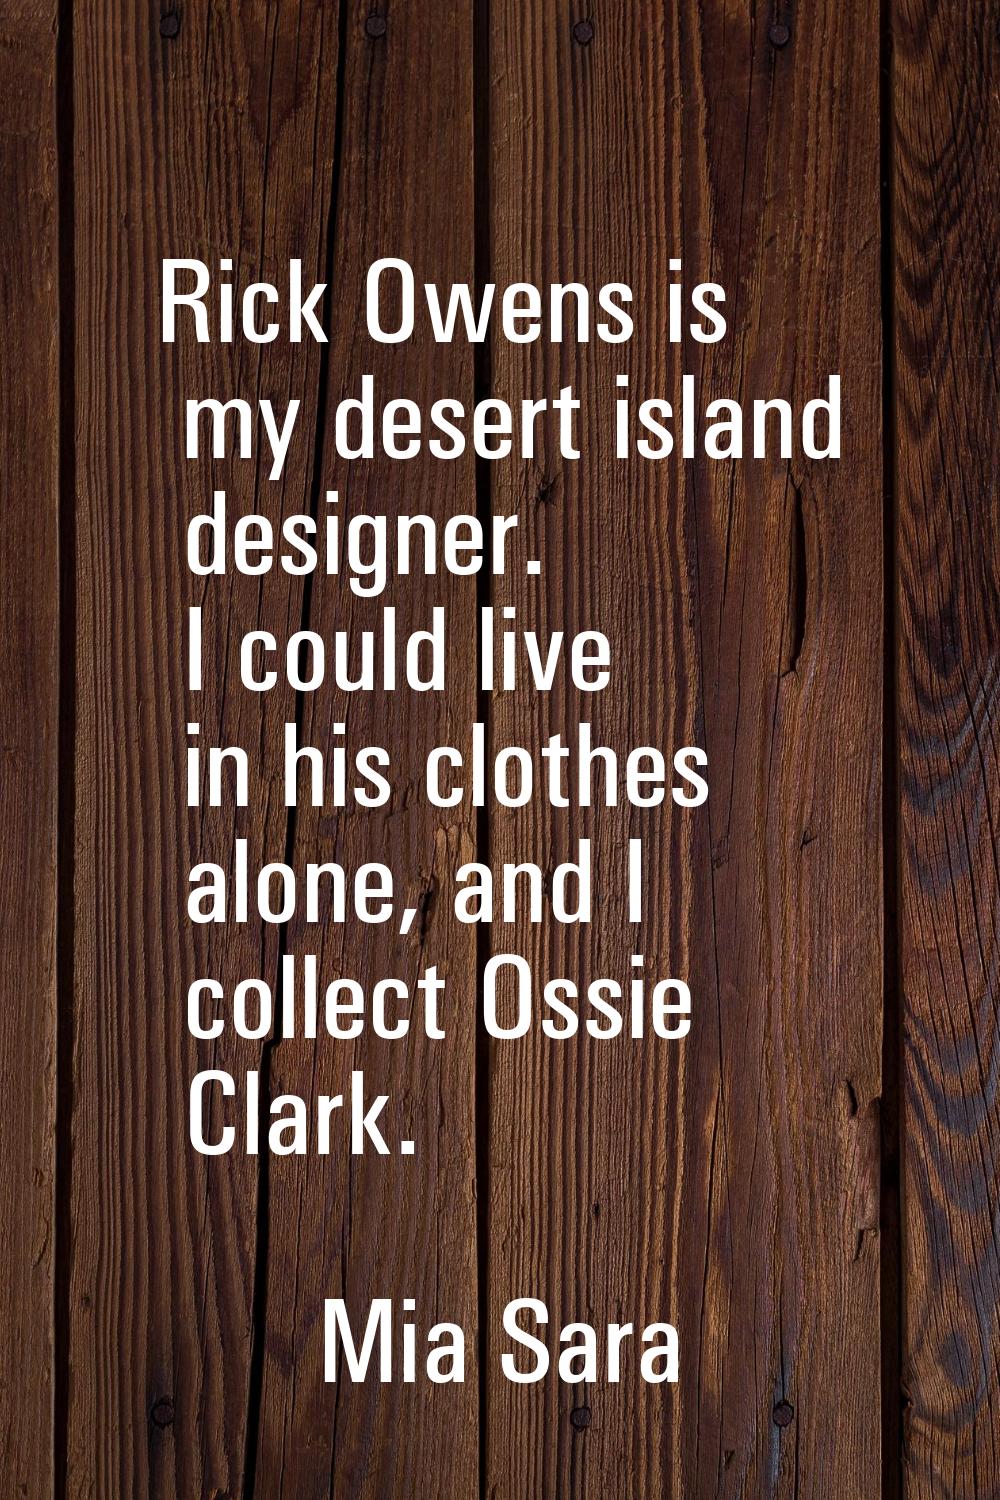 Rick Owens is my desert island designer. I could live in his clothes alone, and I collect Ossie Cla